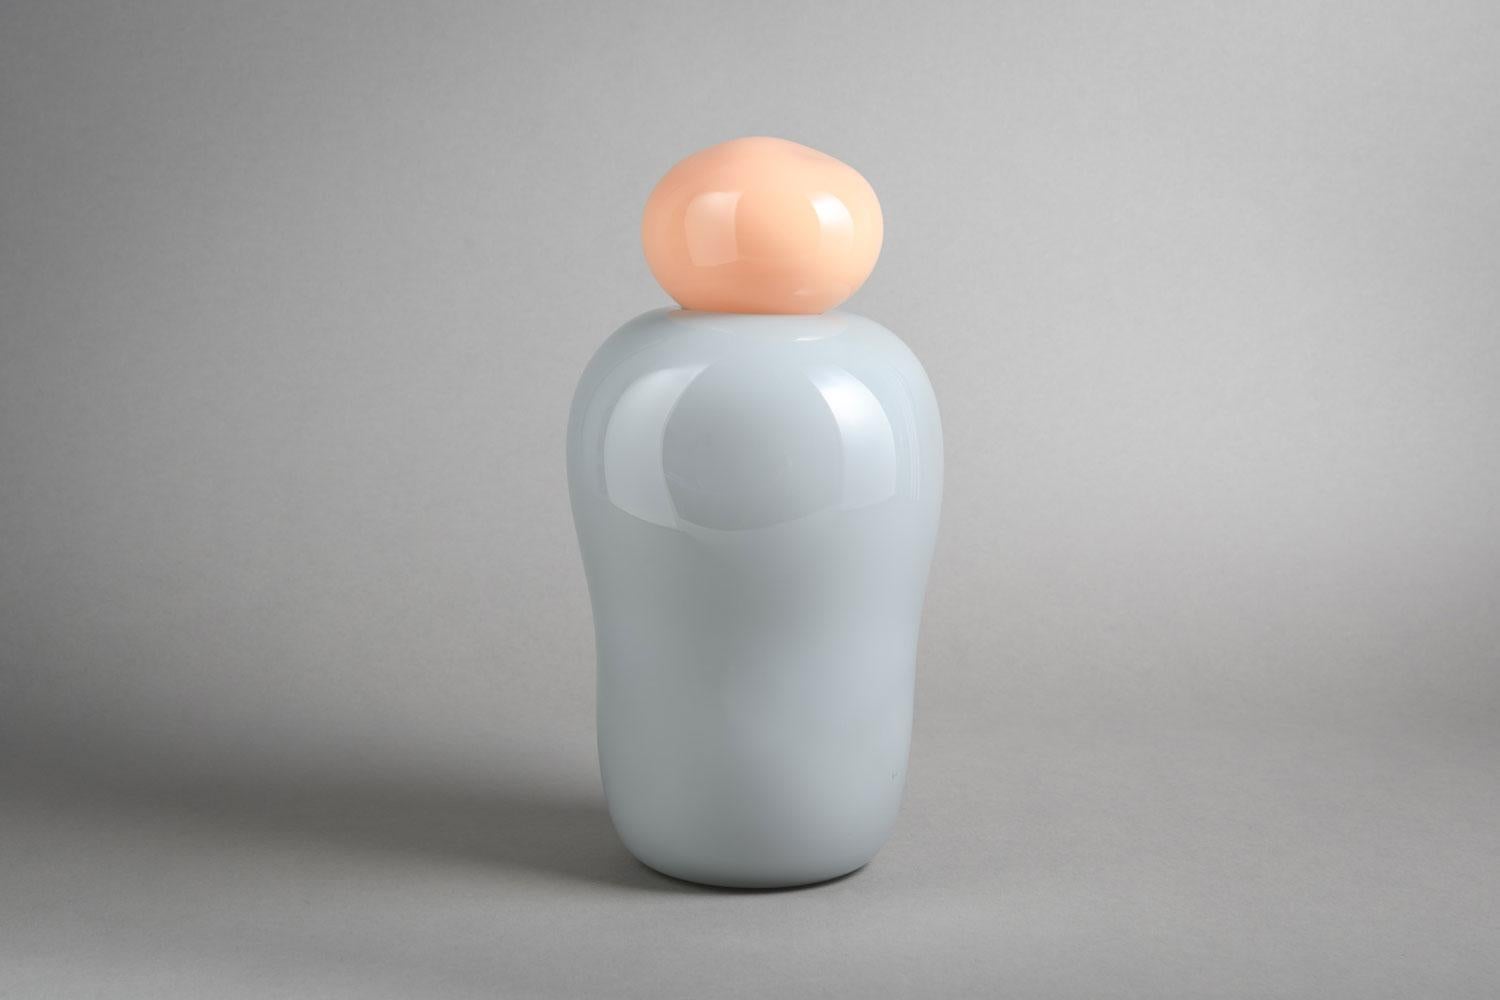 Creamy melon and blueberry ice cream bon bon mega vase by Helle Mardahl
Dimensions: D 15 x H 30 cm
Materials: glass
Also available: other color conbinations available

Helle Mardahl’s Bon Bon Mega Vase is a fusion of sculptural elegance and